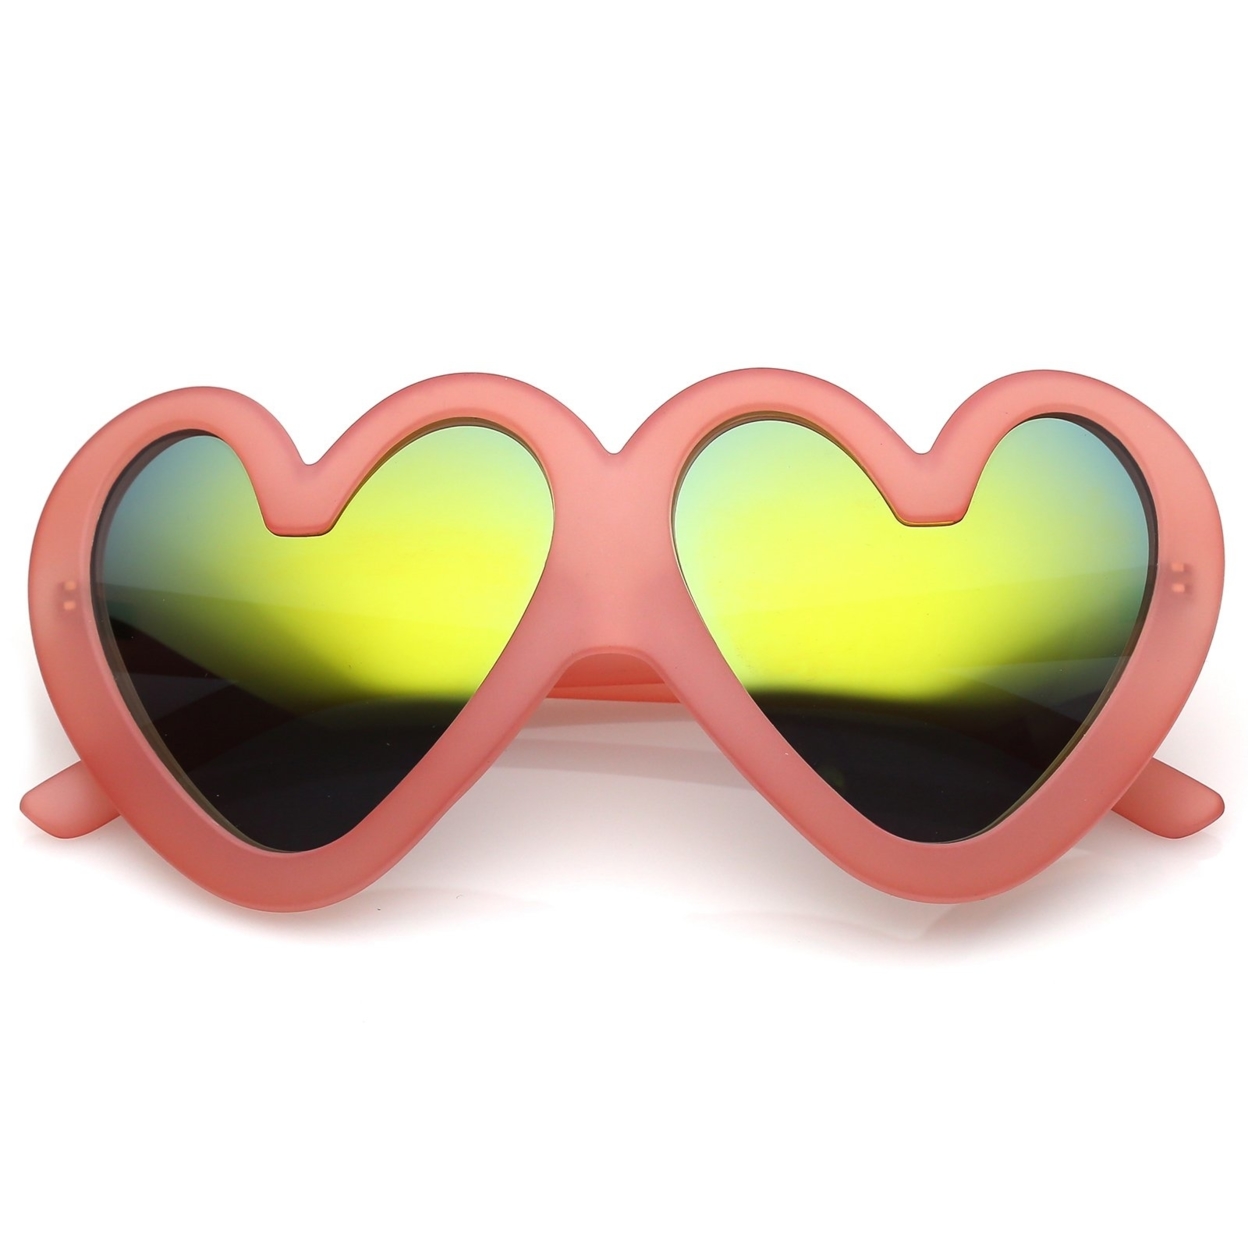 Cute Oversize Heart Sunglasses With Matte Finish Mirrored Lens 55mm - Blue / Blue Mirror